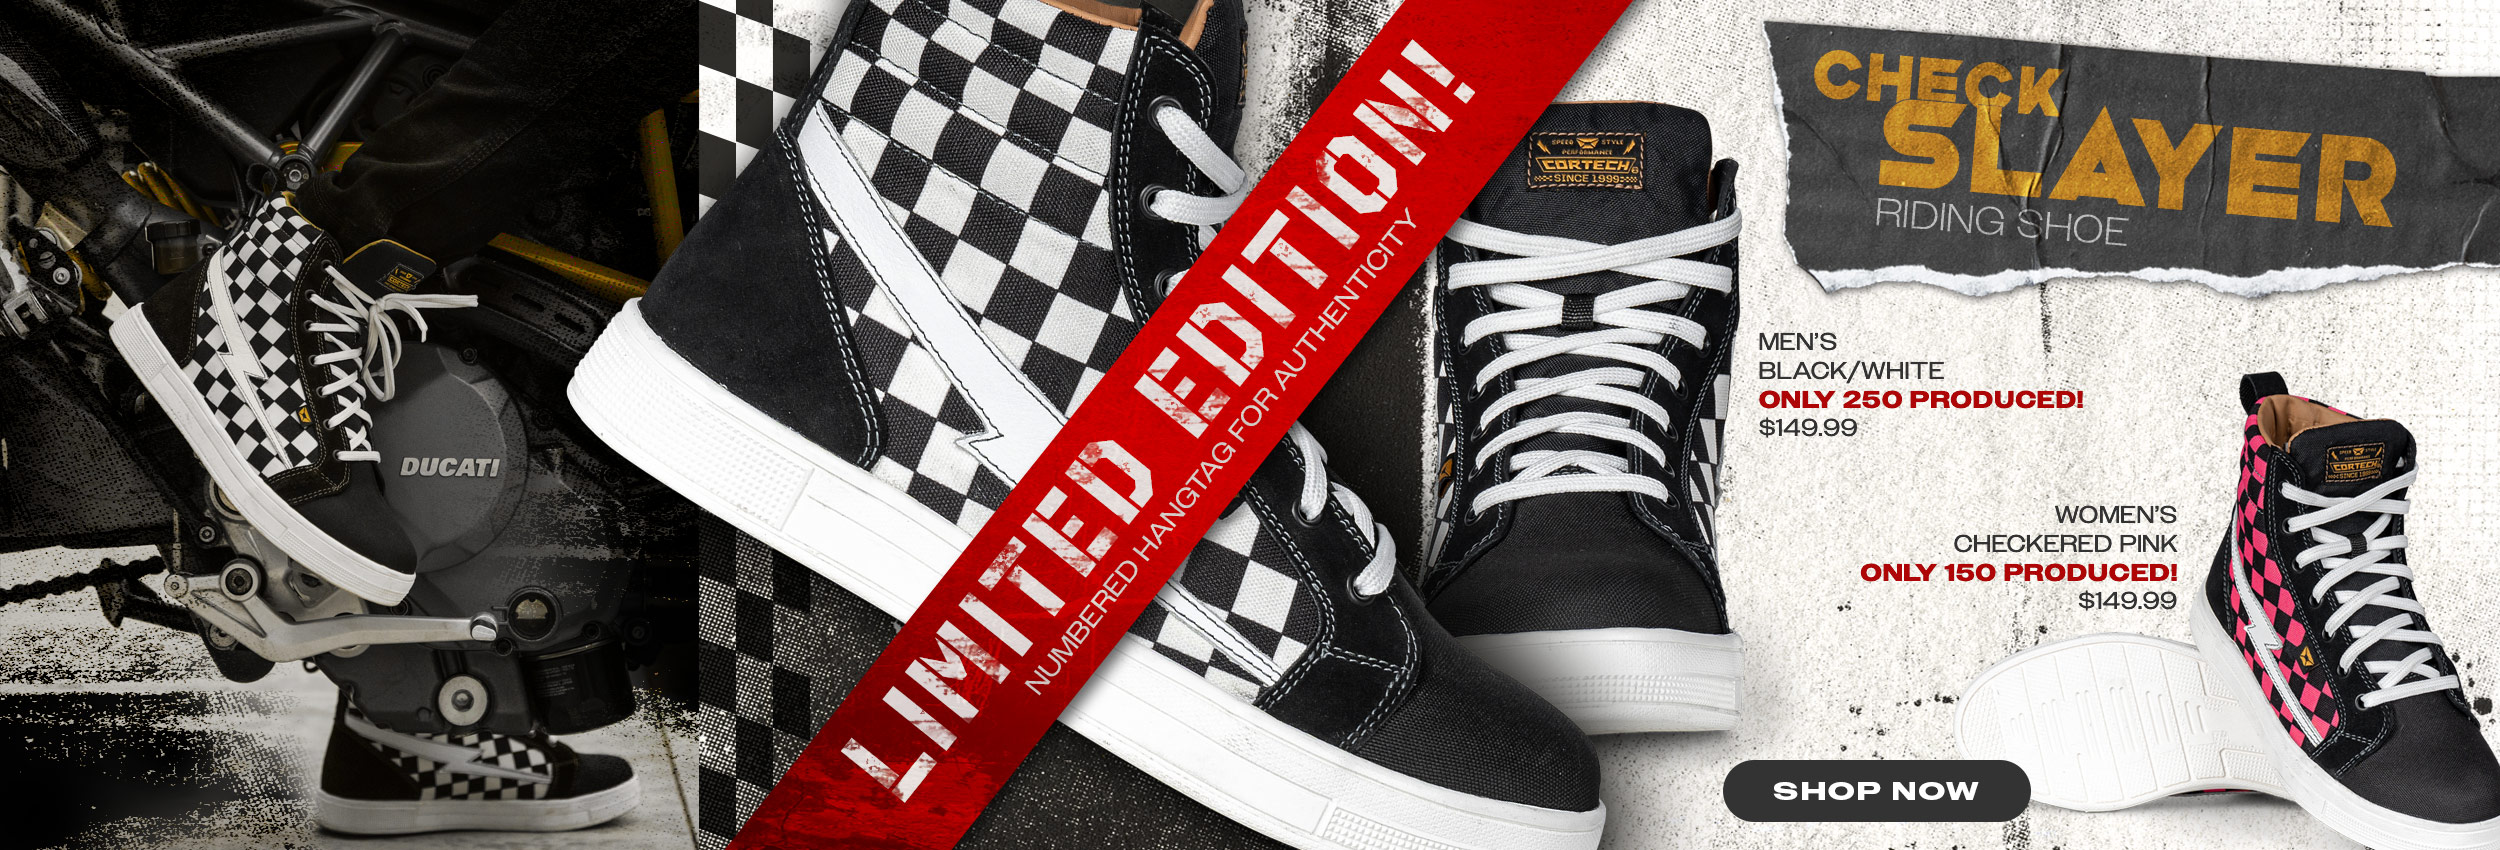 Cortech Limited Edition Check Slayer Riding Shoe